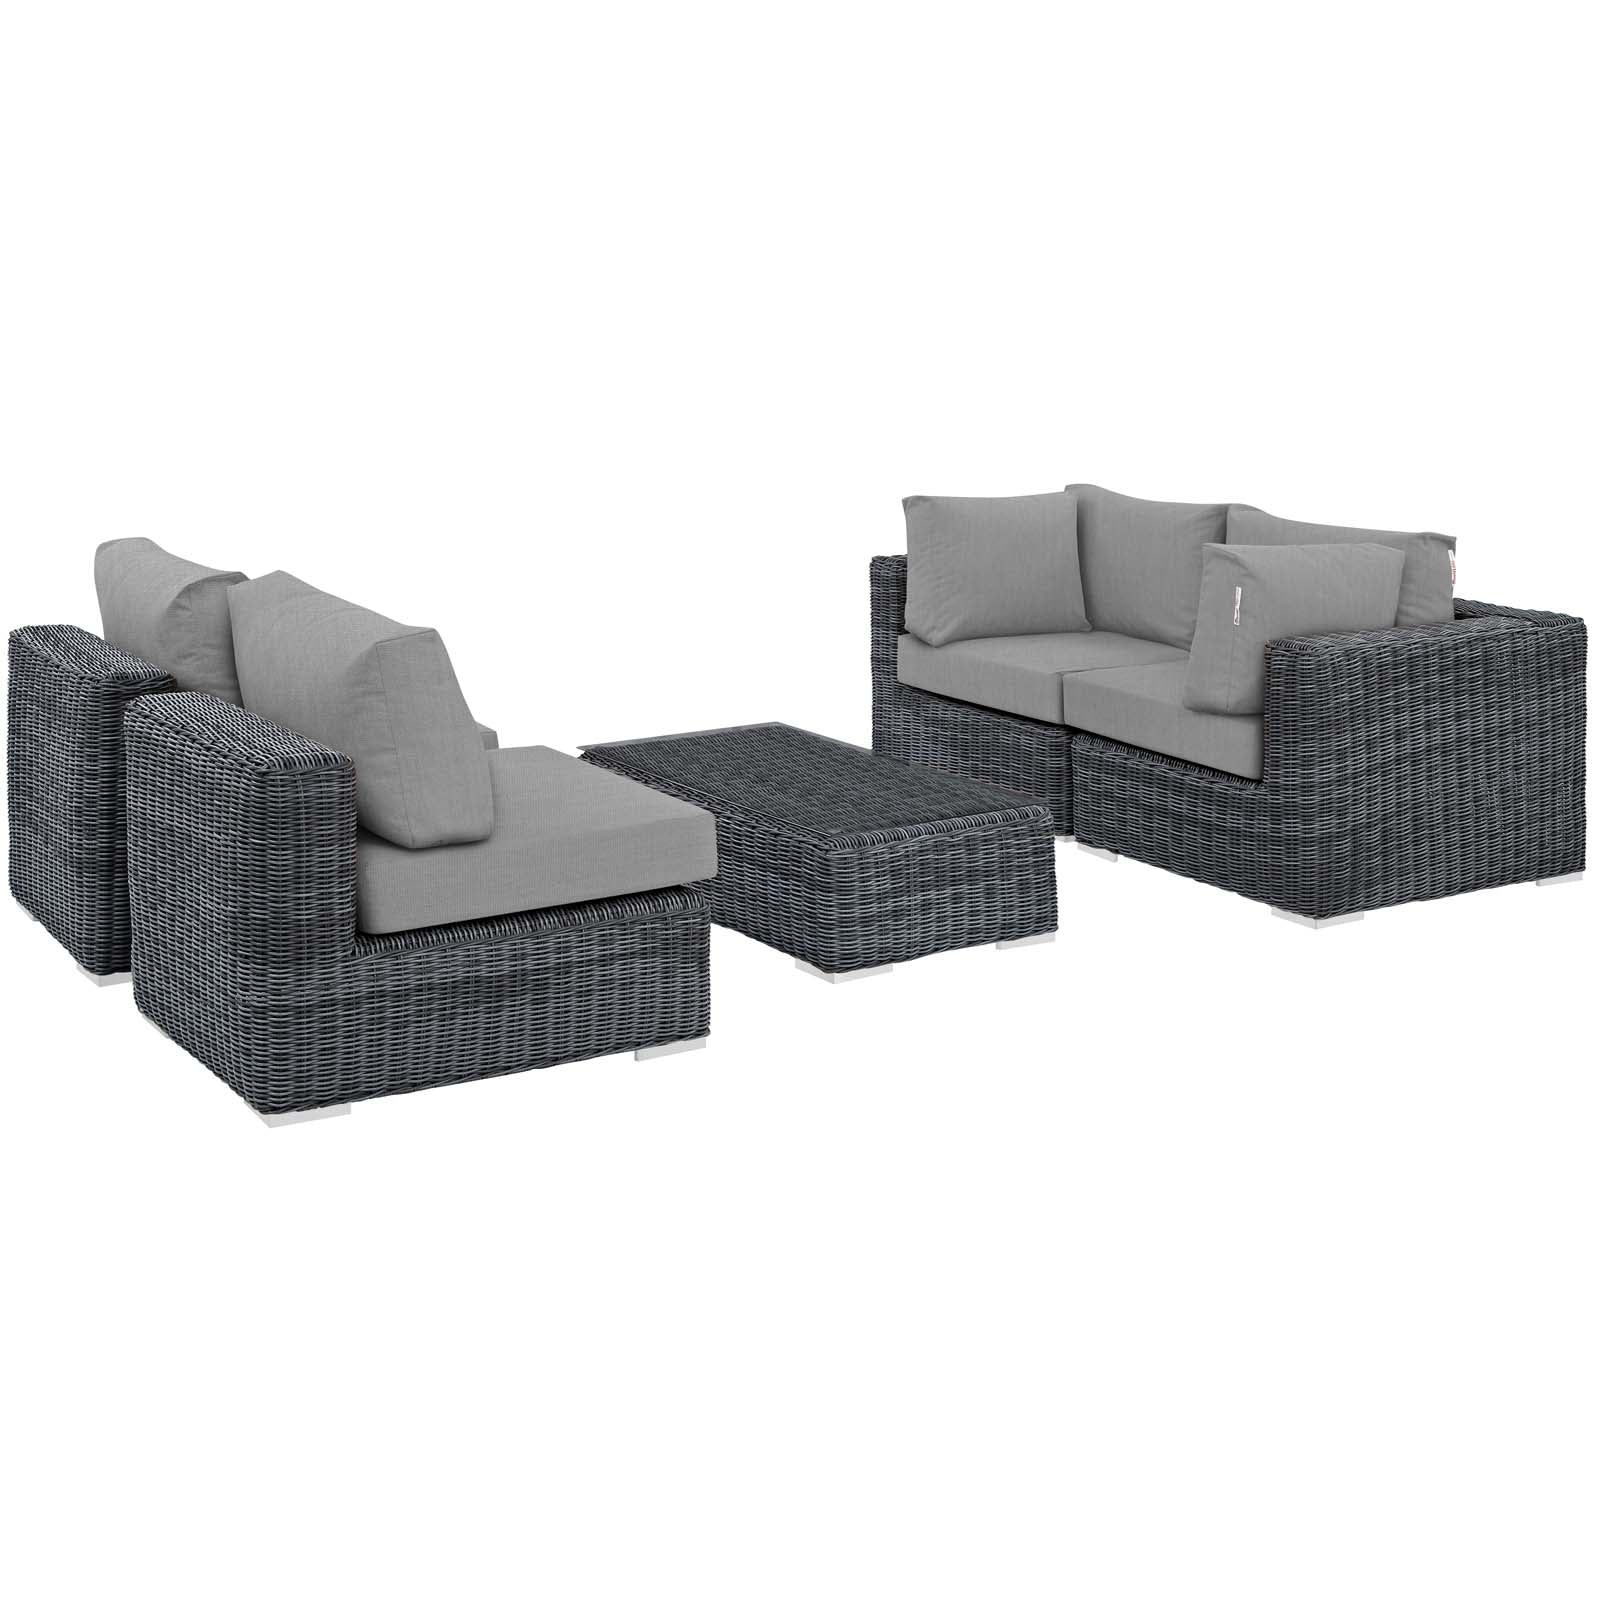 Modway Outdoor Conversation Sets - Summon 5 Piece Outdoor Patio Sectional Set Canvas Gray